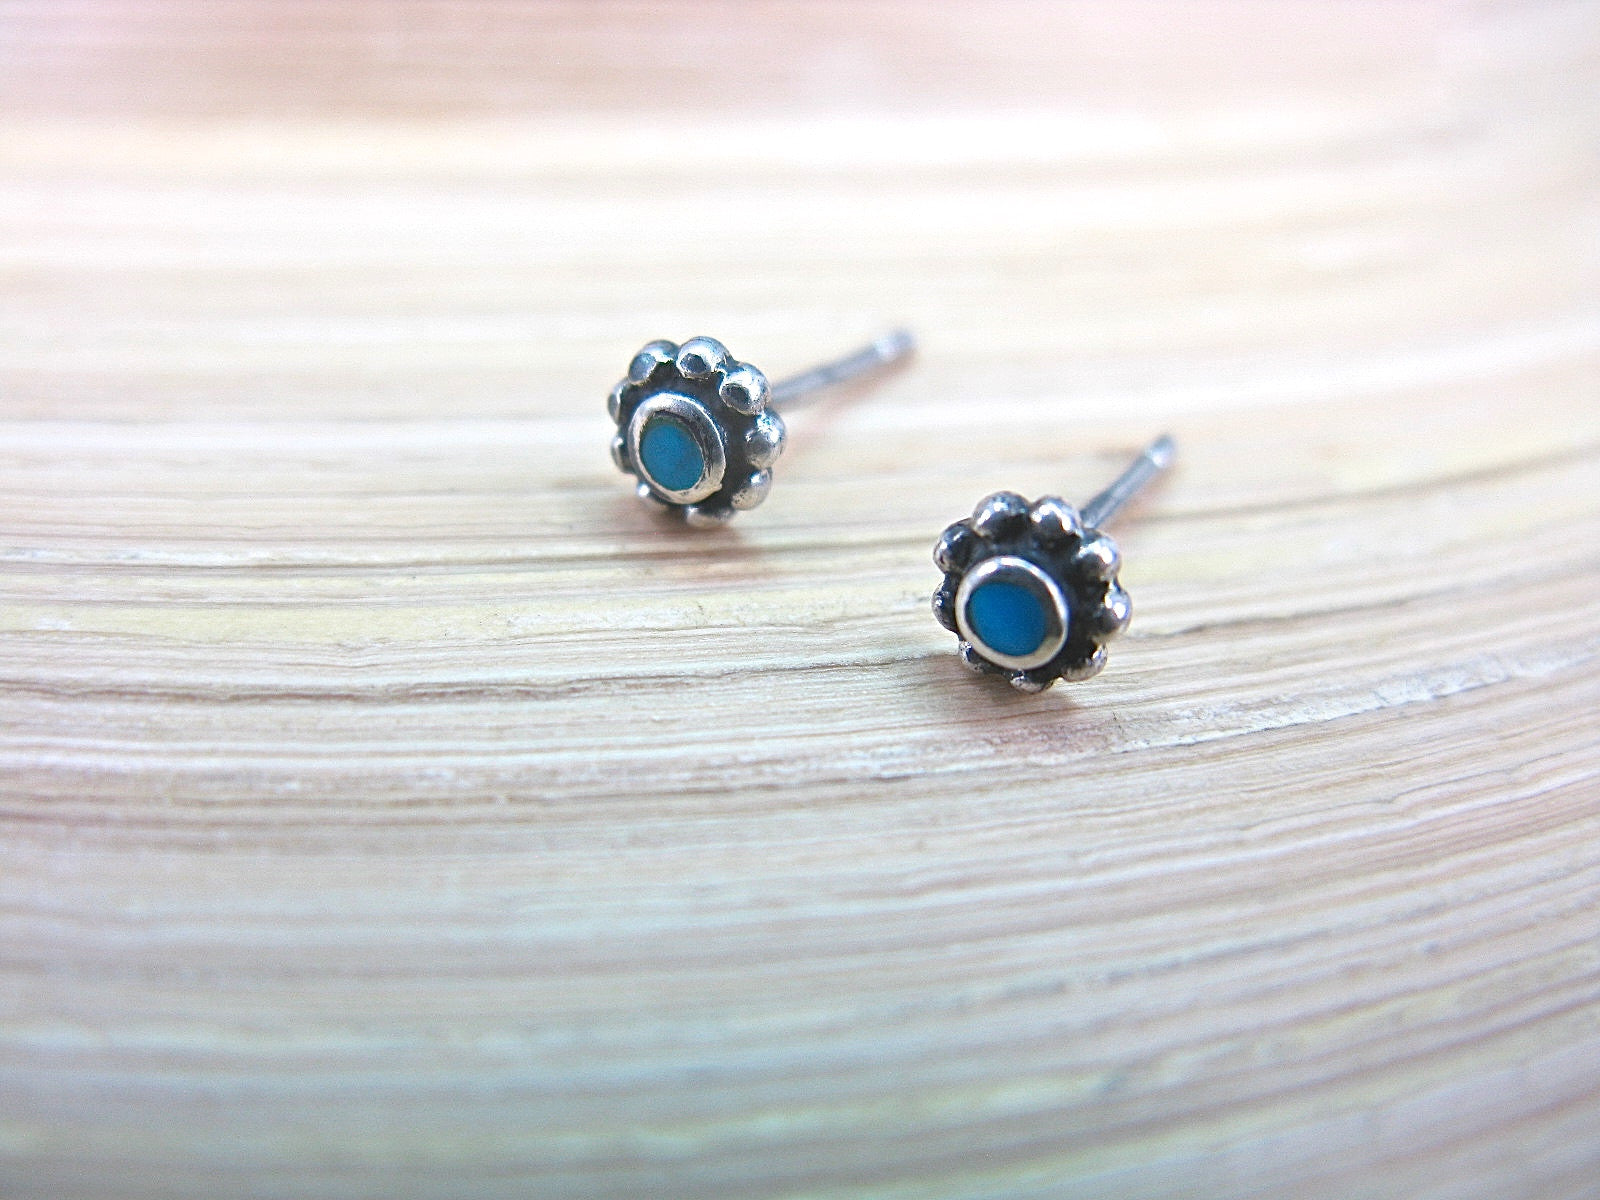 Turquoise 5mm Round Stud Earrings in 925 Sterling Silver Stud Faith Owl - Faith Owl